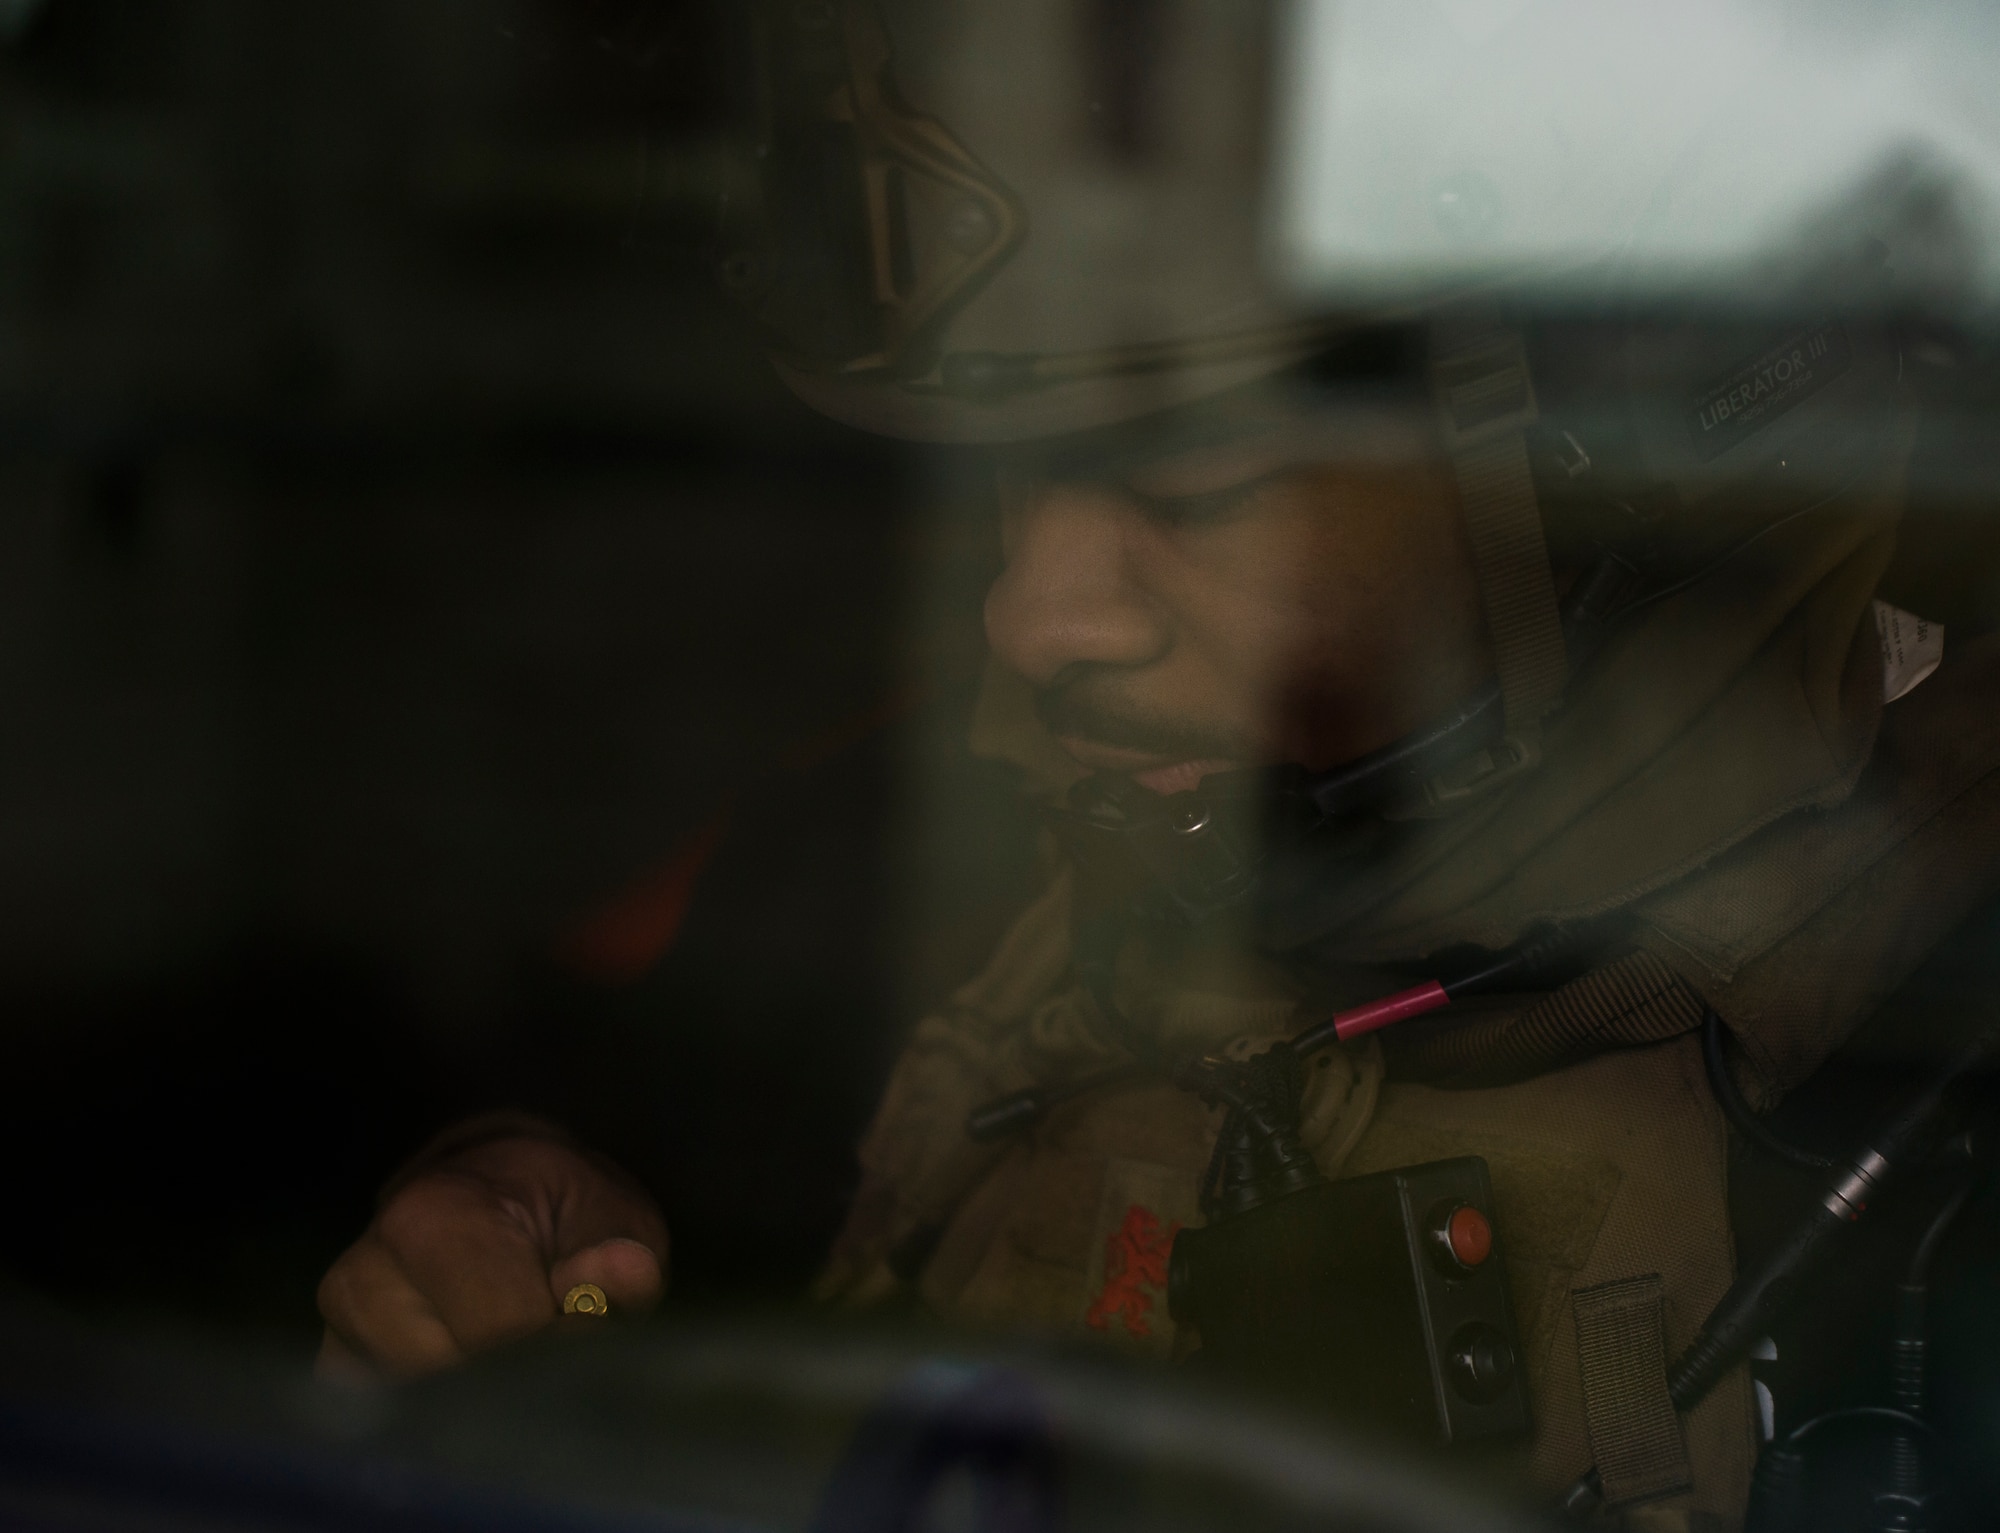 Senior Airman Deshaun Dixon, 2nd Air Support Operations Squadron, 2nd Air Support Operations Squadron joint terminal attack controller, loads his magazine with blank rounds during training at U.S. Army Garrison Bavaria in Vilseck, Germany, Feb. 9, 2016. The training consisted of 2nd ASOS Airmen calling in close air support, neutralizing opposing forces and practicing medical evacuation by helicopter. (U.S. Air Force photo/Senior Airman Jonathan Stefanko)